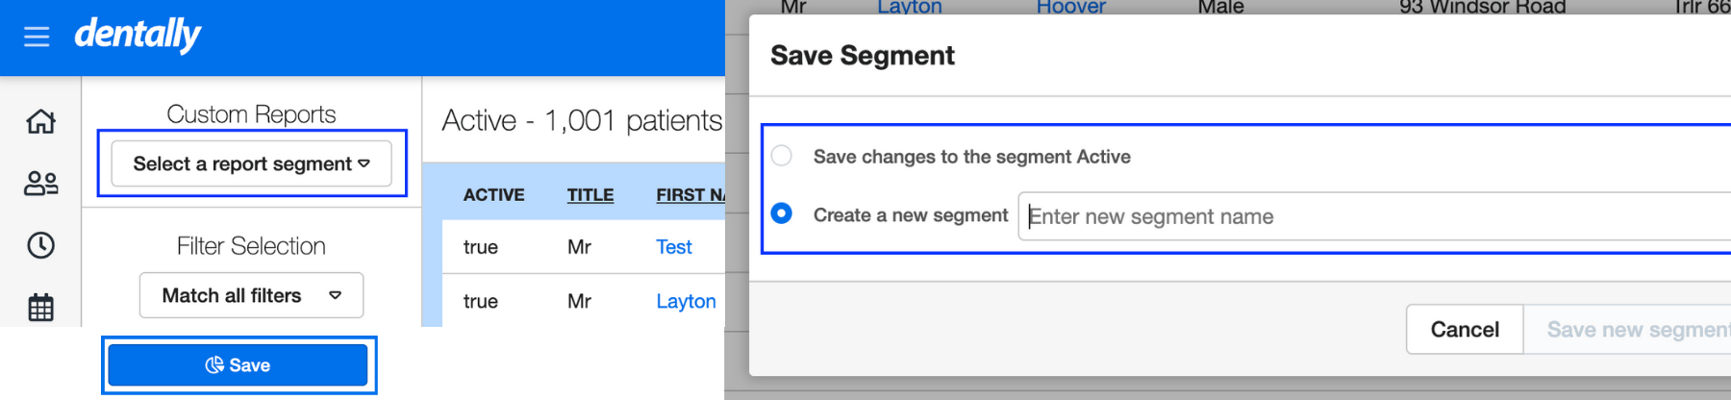 Image highlighting the select exisiting report segment and the save button to create a new segment or update an exisiting one which is highlighted to the right. 